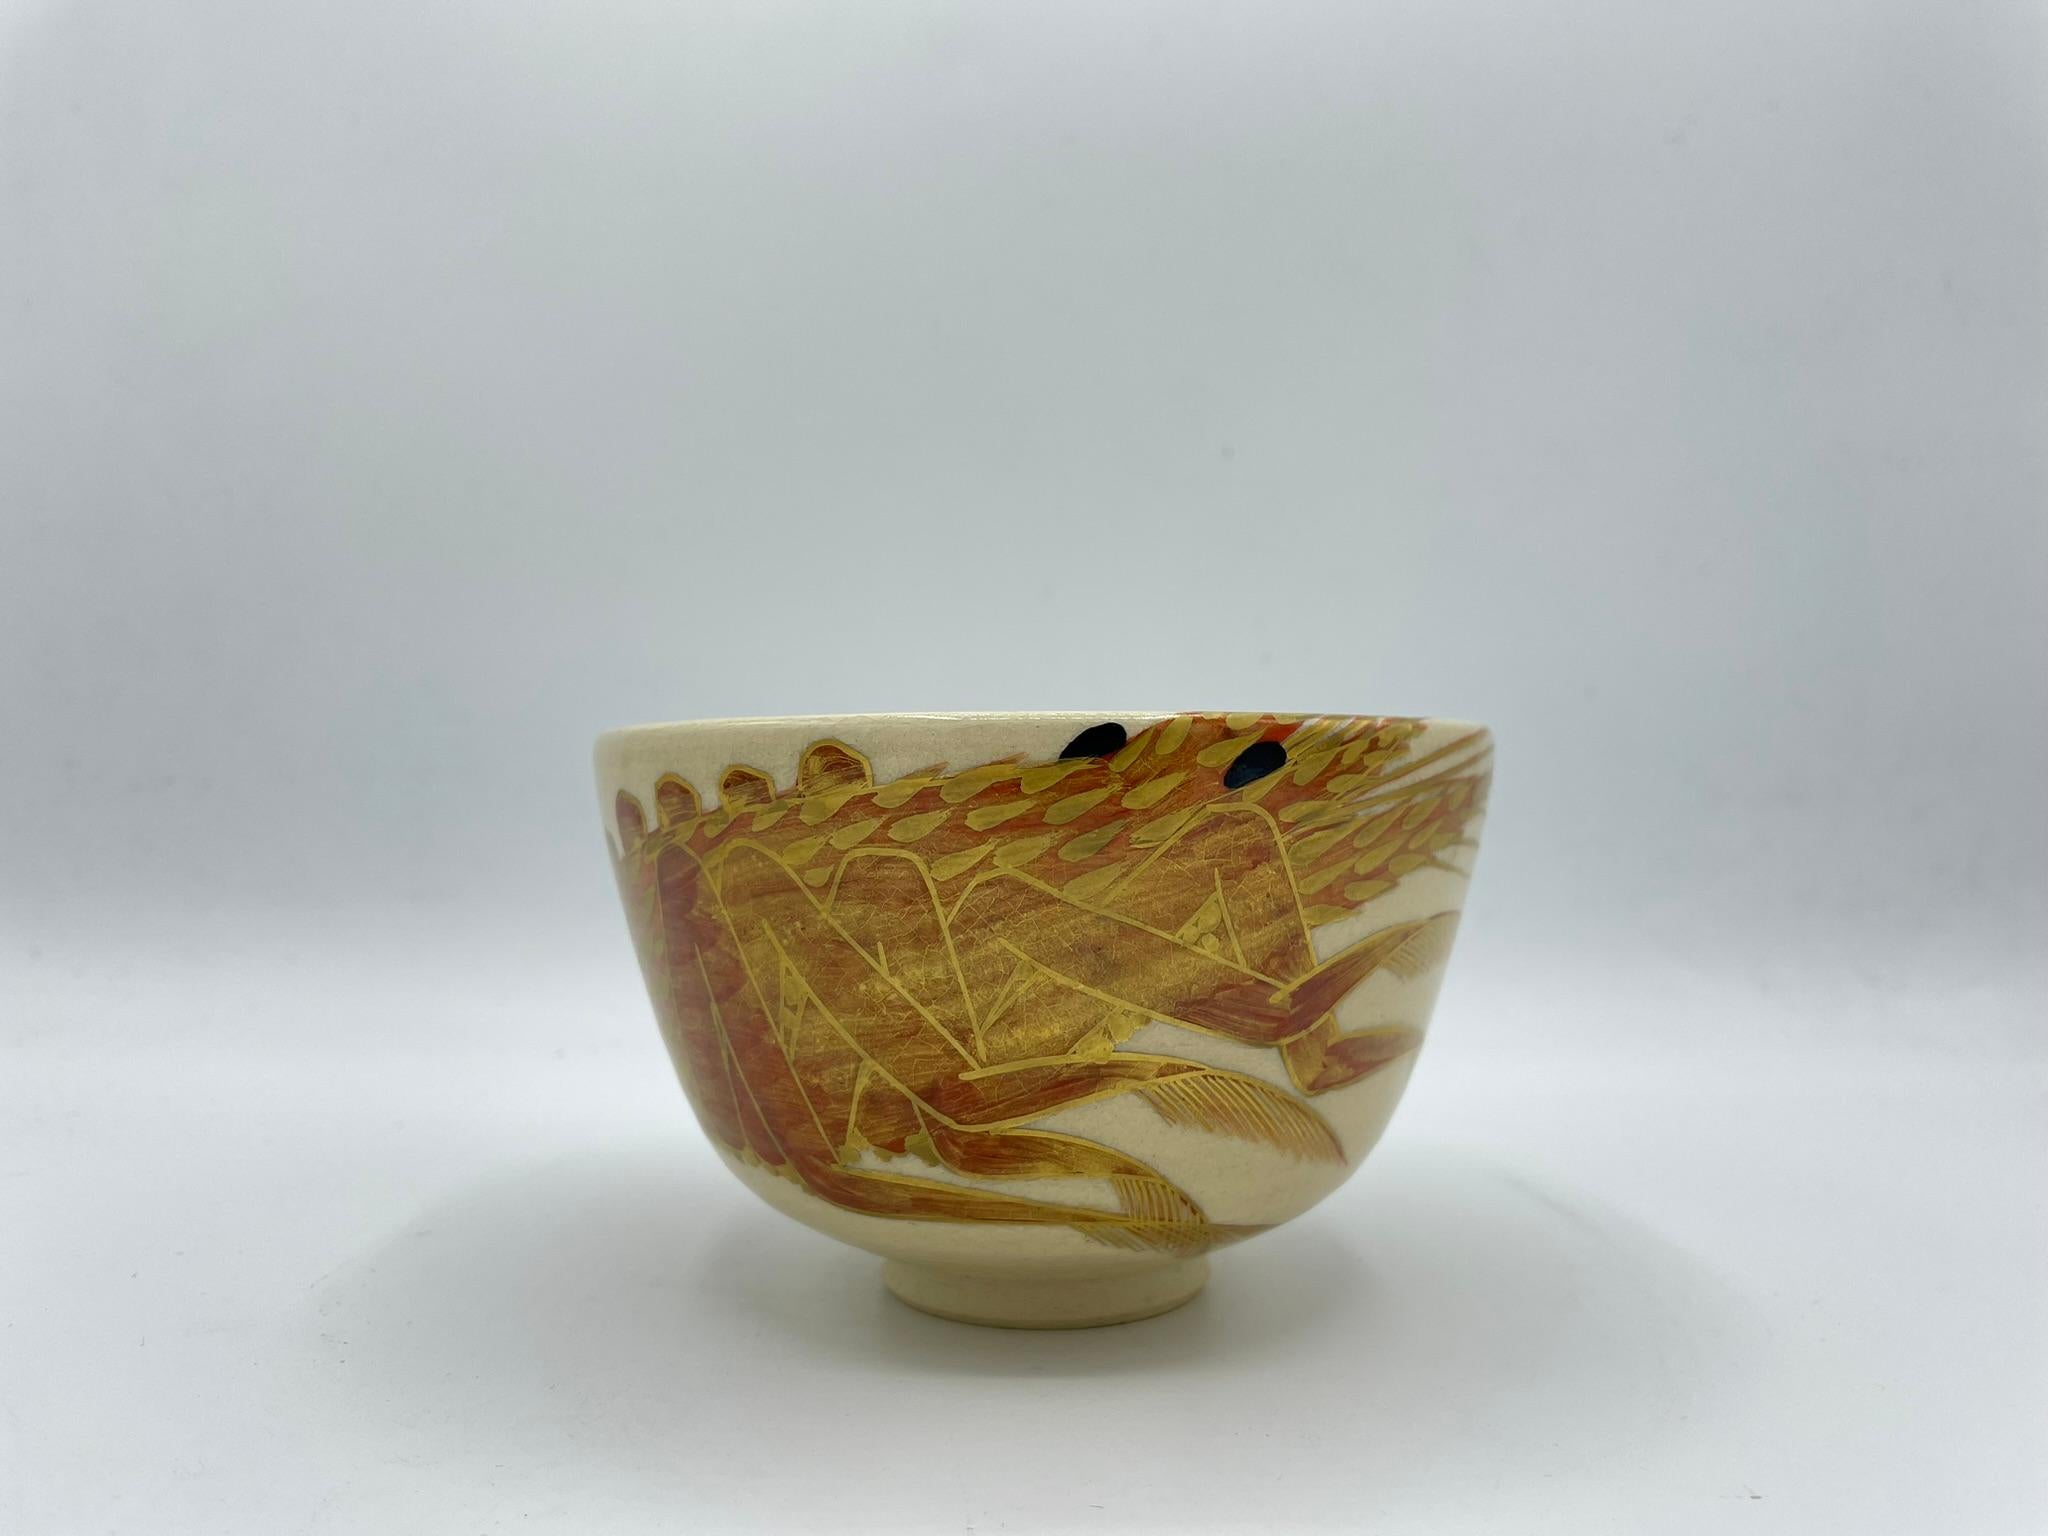 This is a matcha bowl serving during tea ceremony.
This item was made around 1960s in Showa era. The material is porcelain and the design is a shrimp.
This matcha bowl was made in Kyoto prefecture, Japan with style Kyo ware.
On the back, there